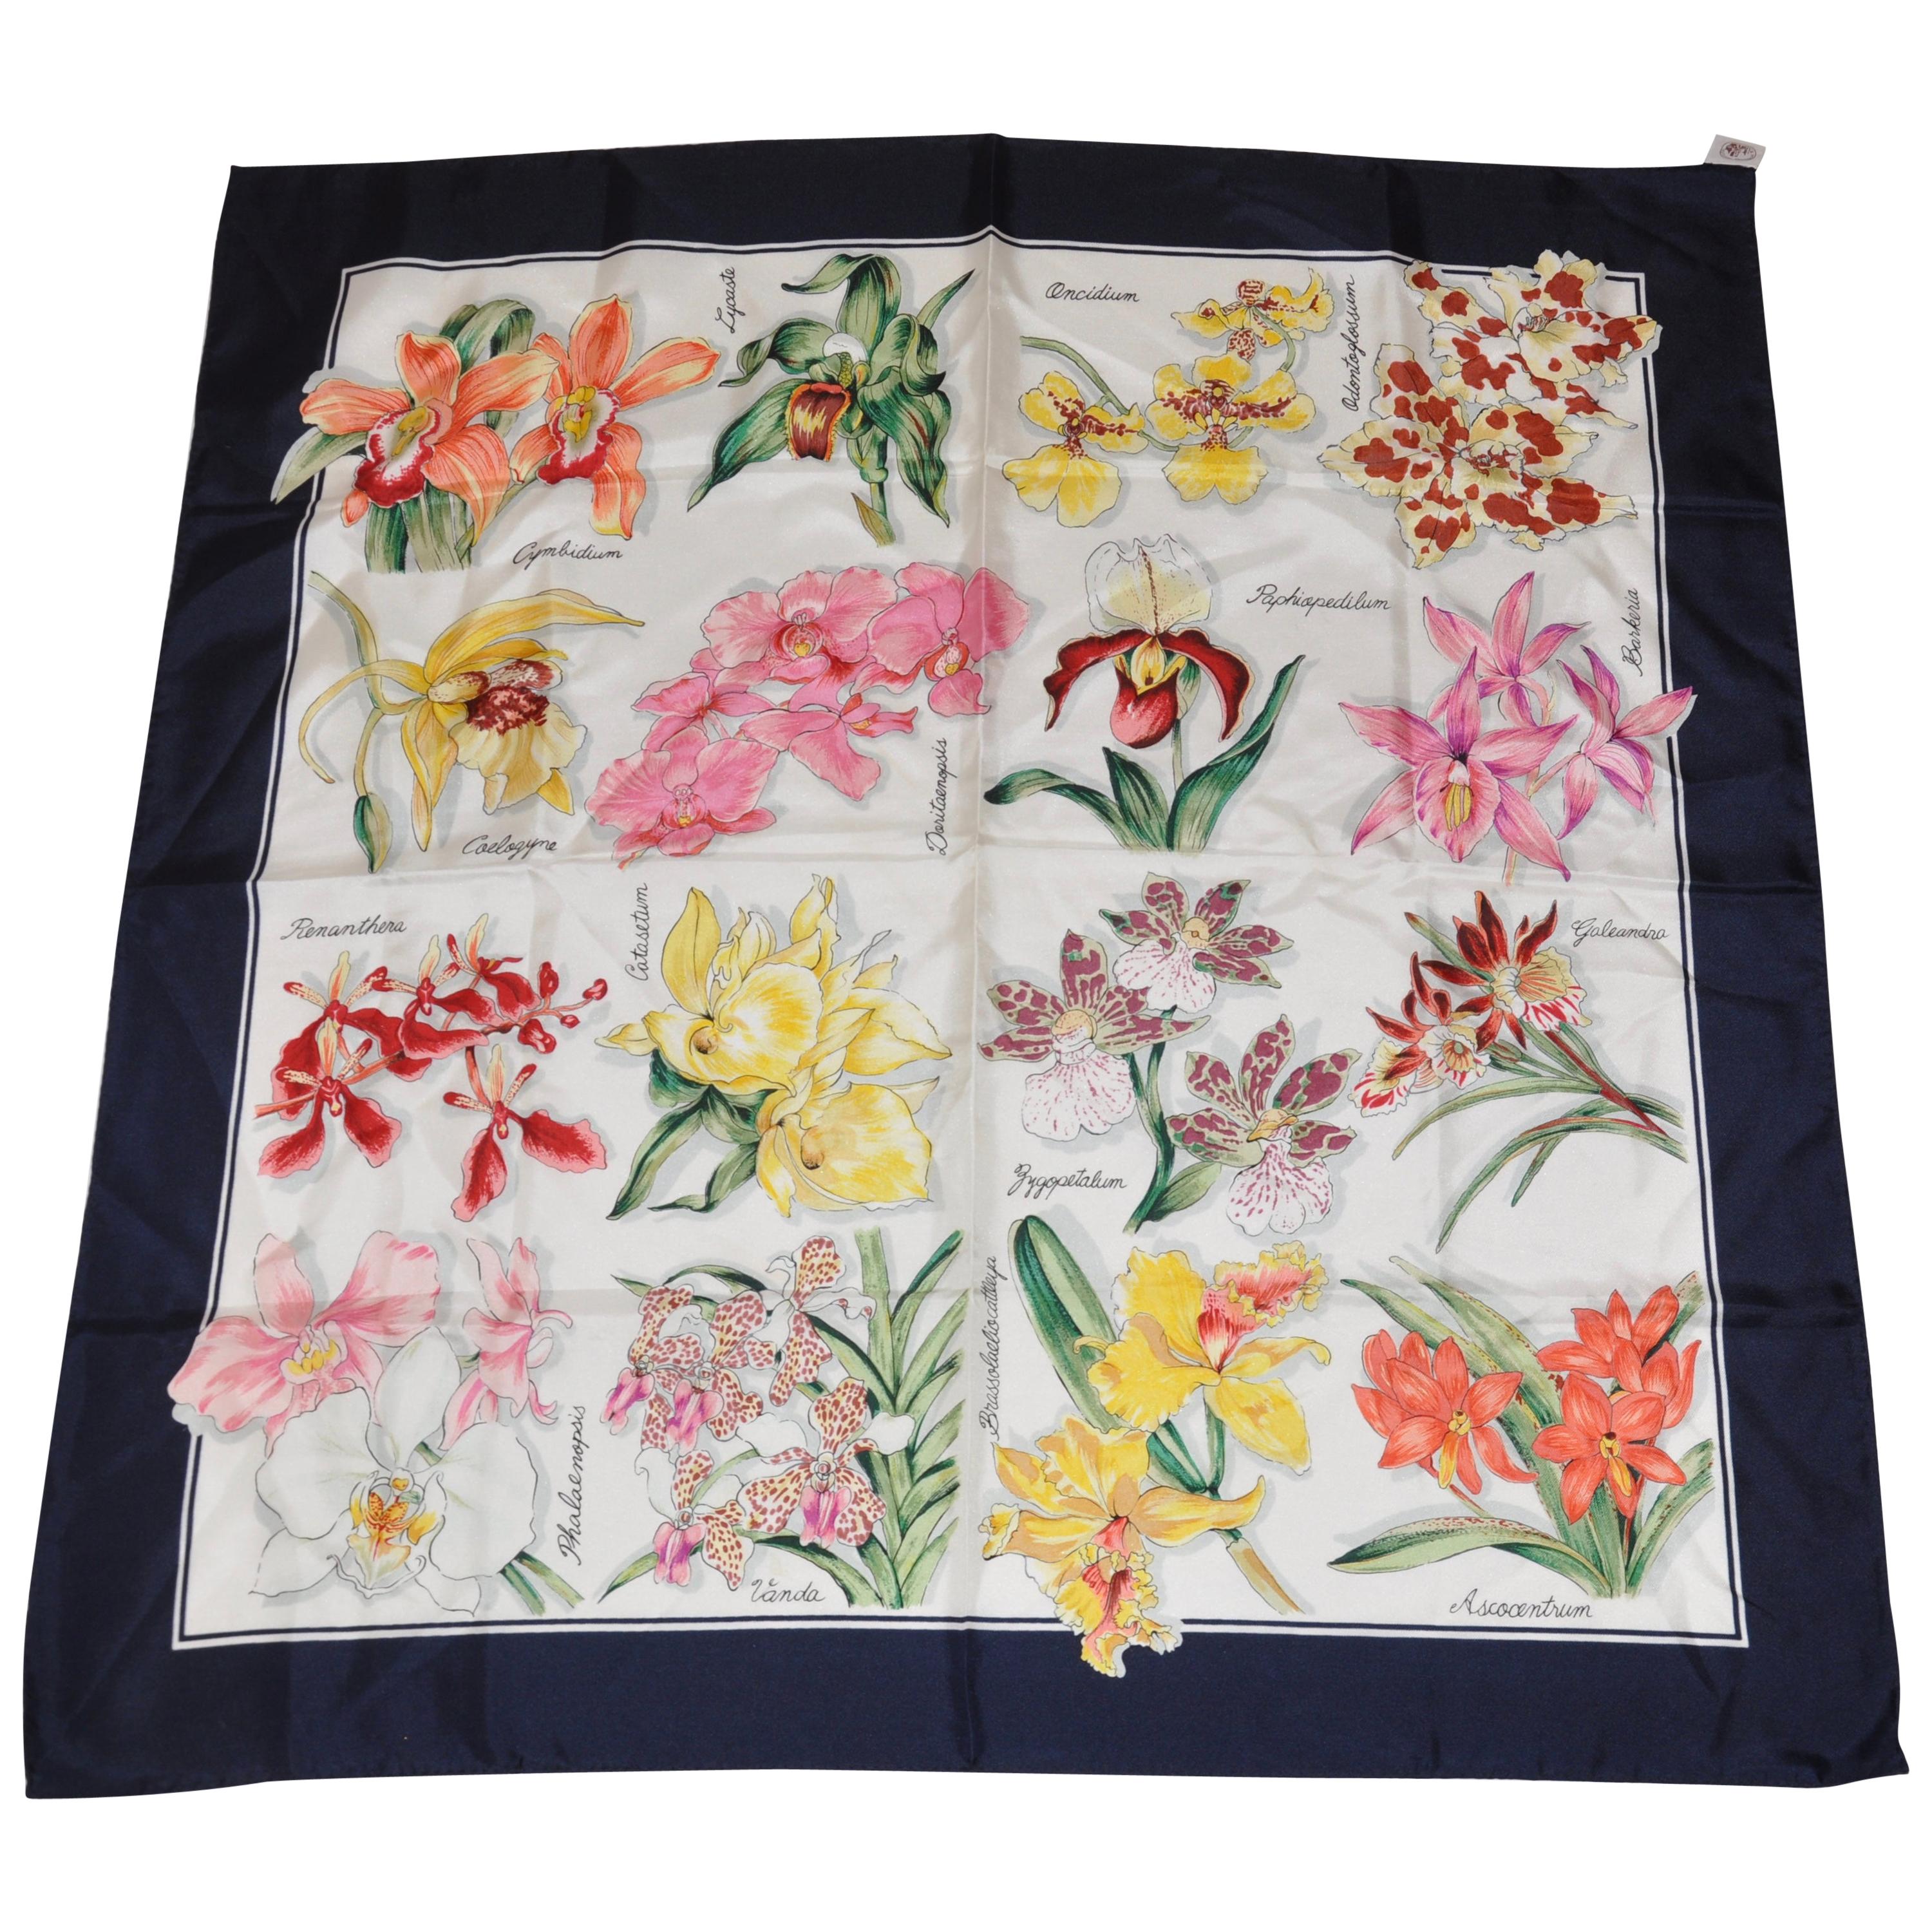 Beautiful "Dictionary of Floral Blooms" Silk Scarf